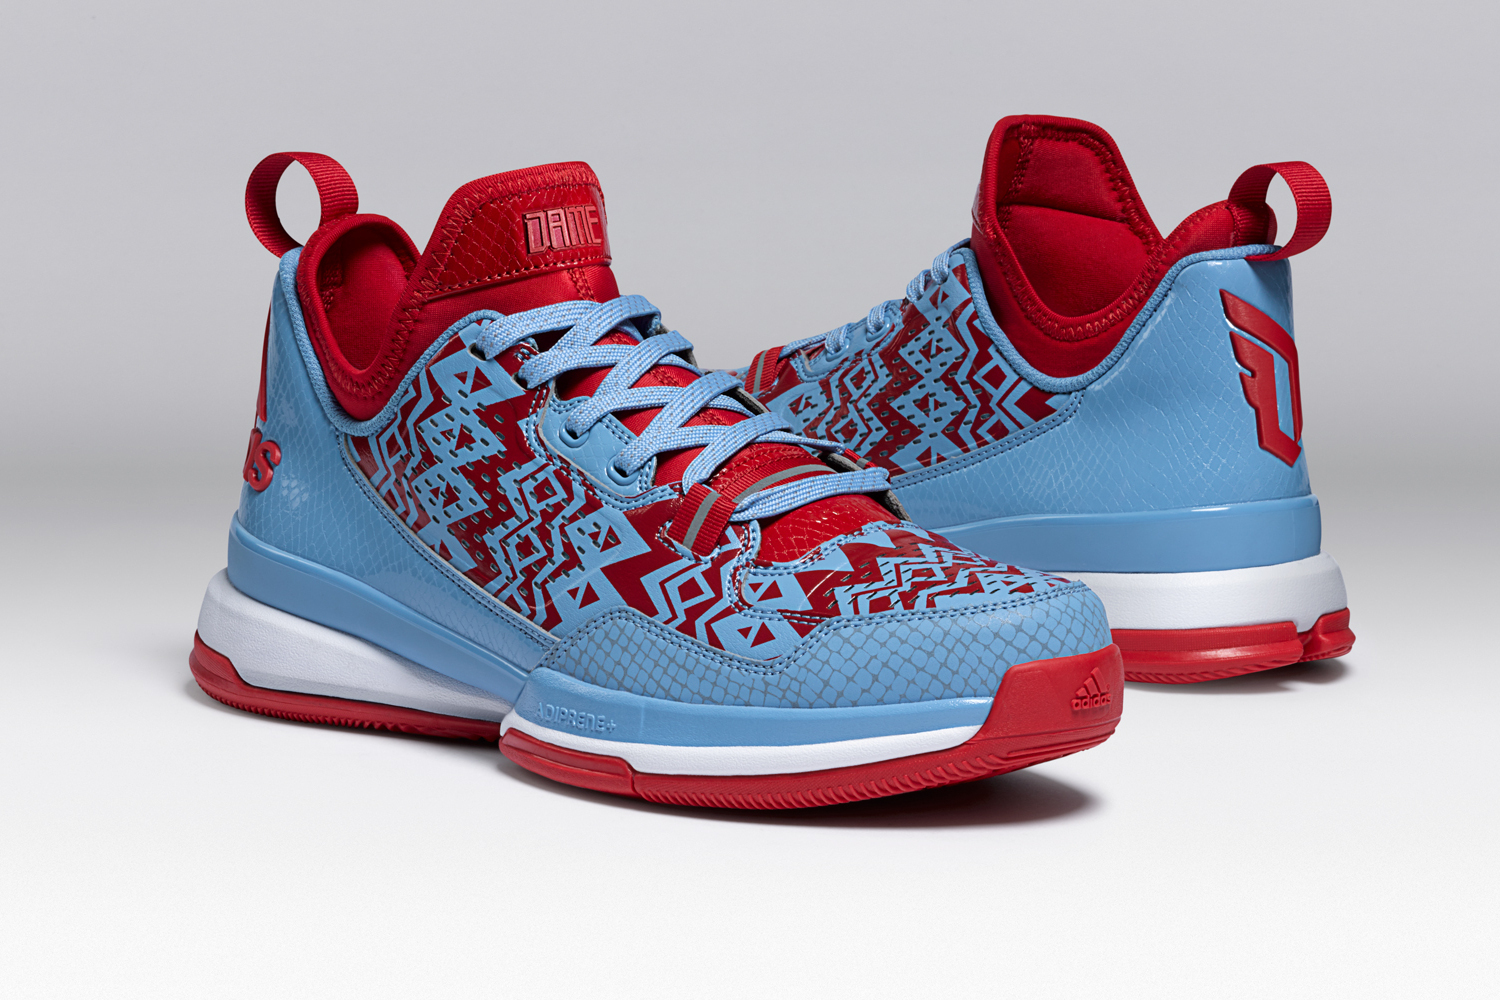 Damian Lillard's 1st Signature Shoe, the D Lillard 1 by Adidas, Is Unveiled  | News, Scores, Highlights, Stats, and Rumors | Bleacher Report